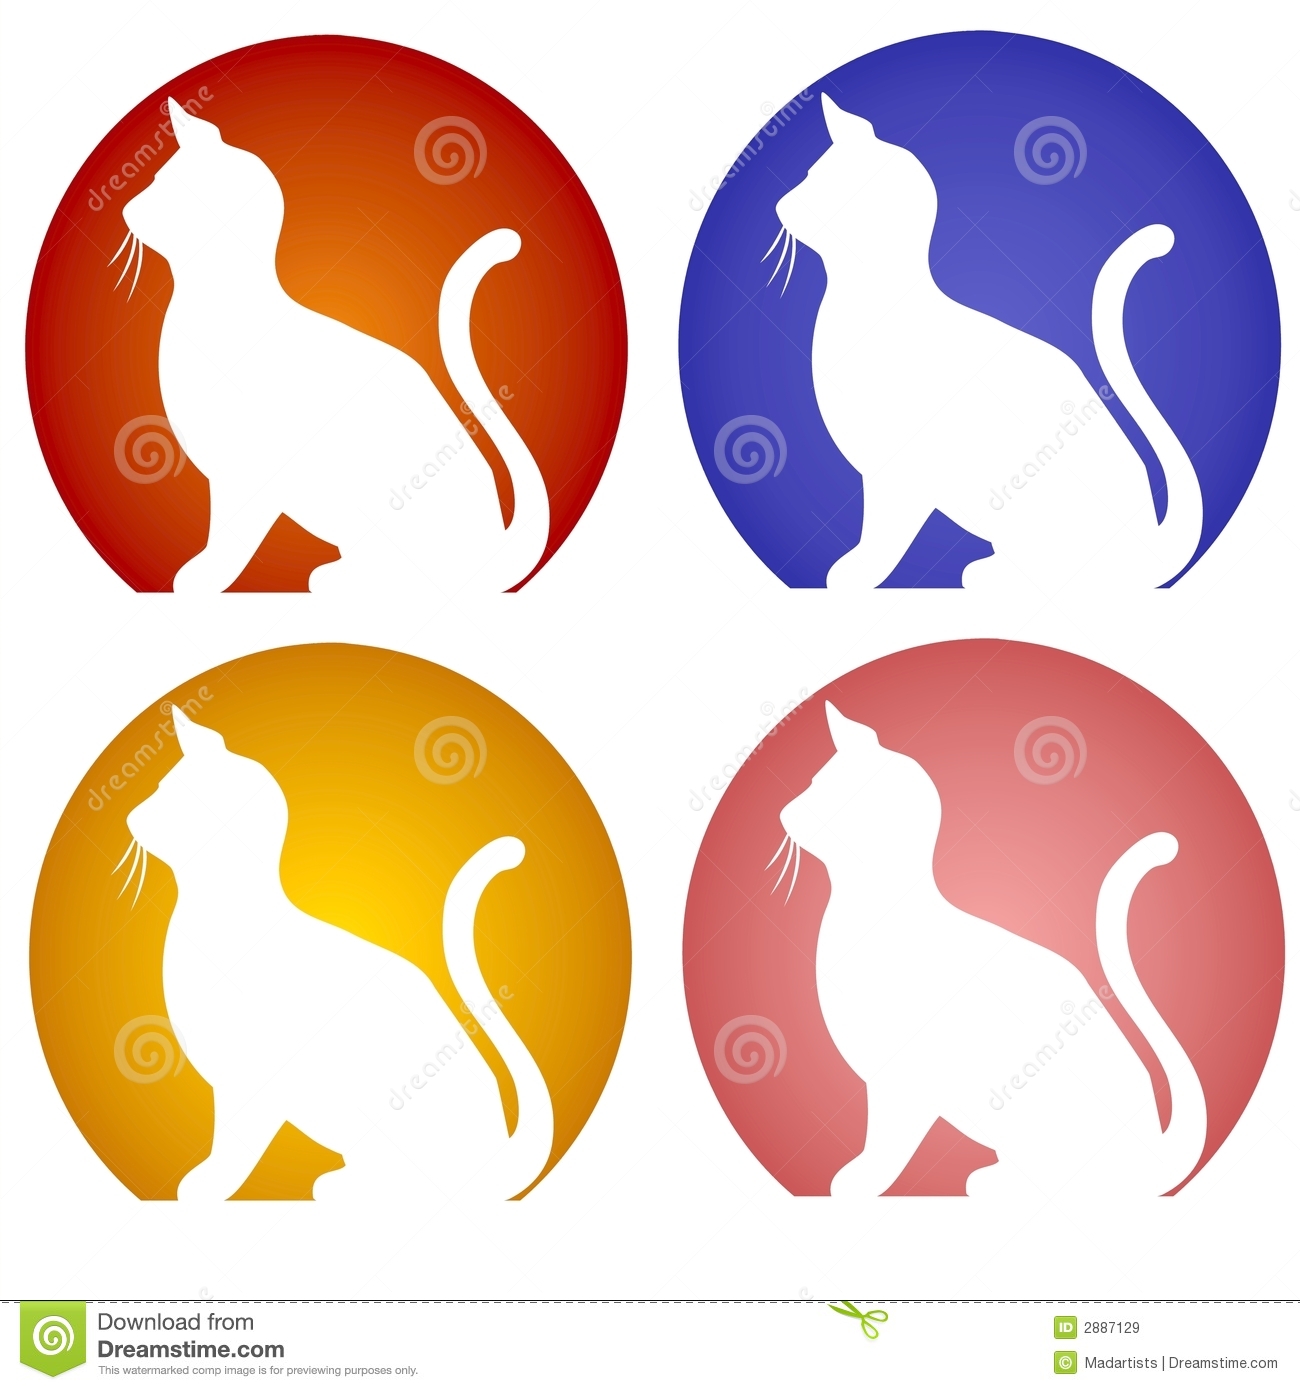 Of 4 Cat Silhouette Icons In Red Blue Yellow And Pink With White